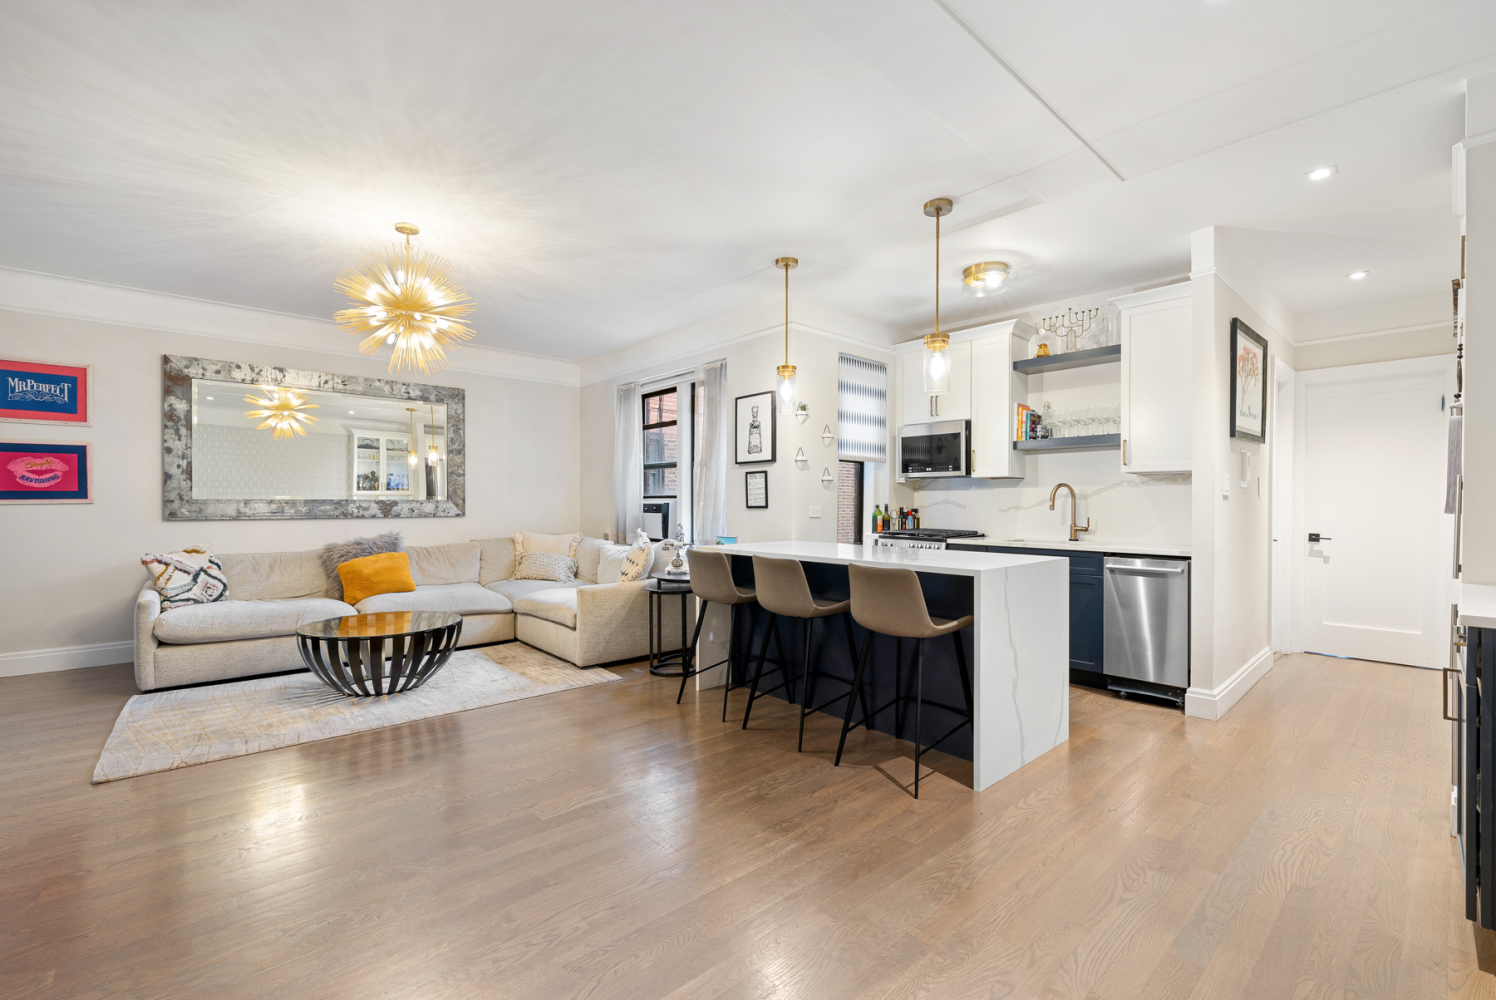 402 East 74th Street 6D, Lenox Hill, Upper East Side, NYC - 1 Bedrooms  
1 Bathrooms  
4 Rooms - 